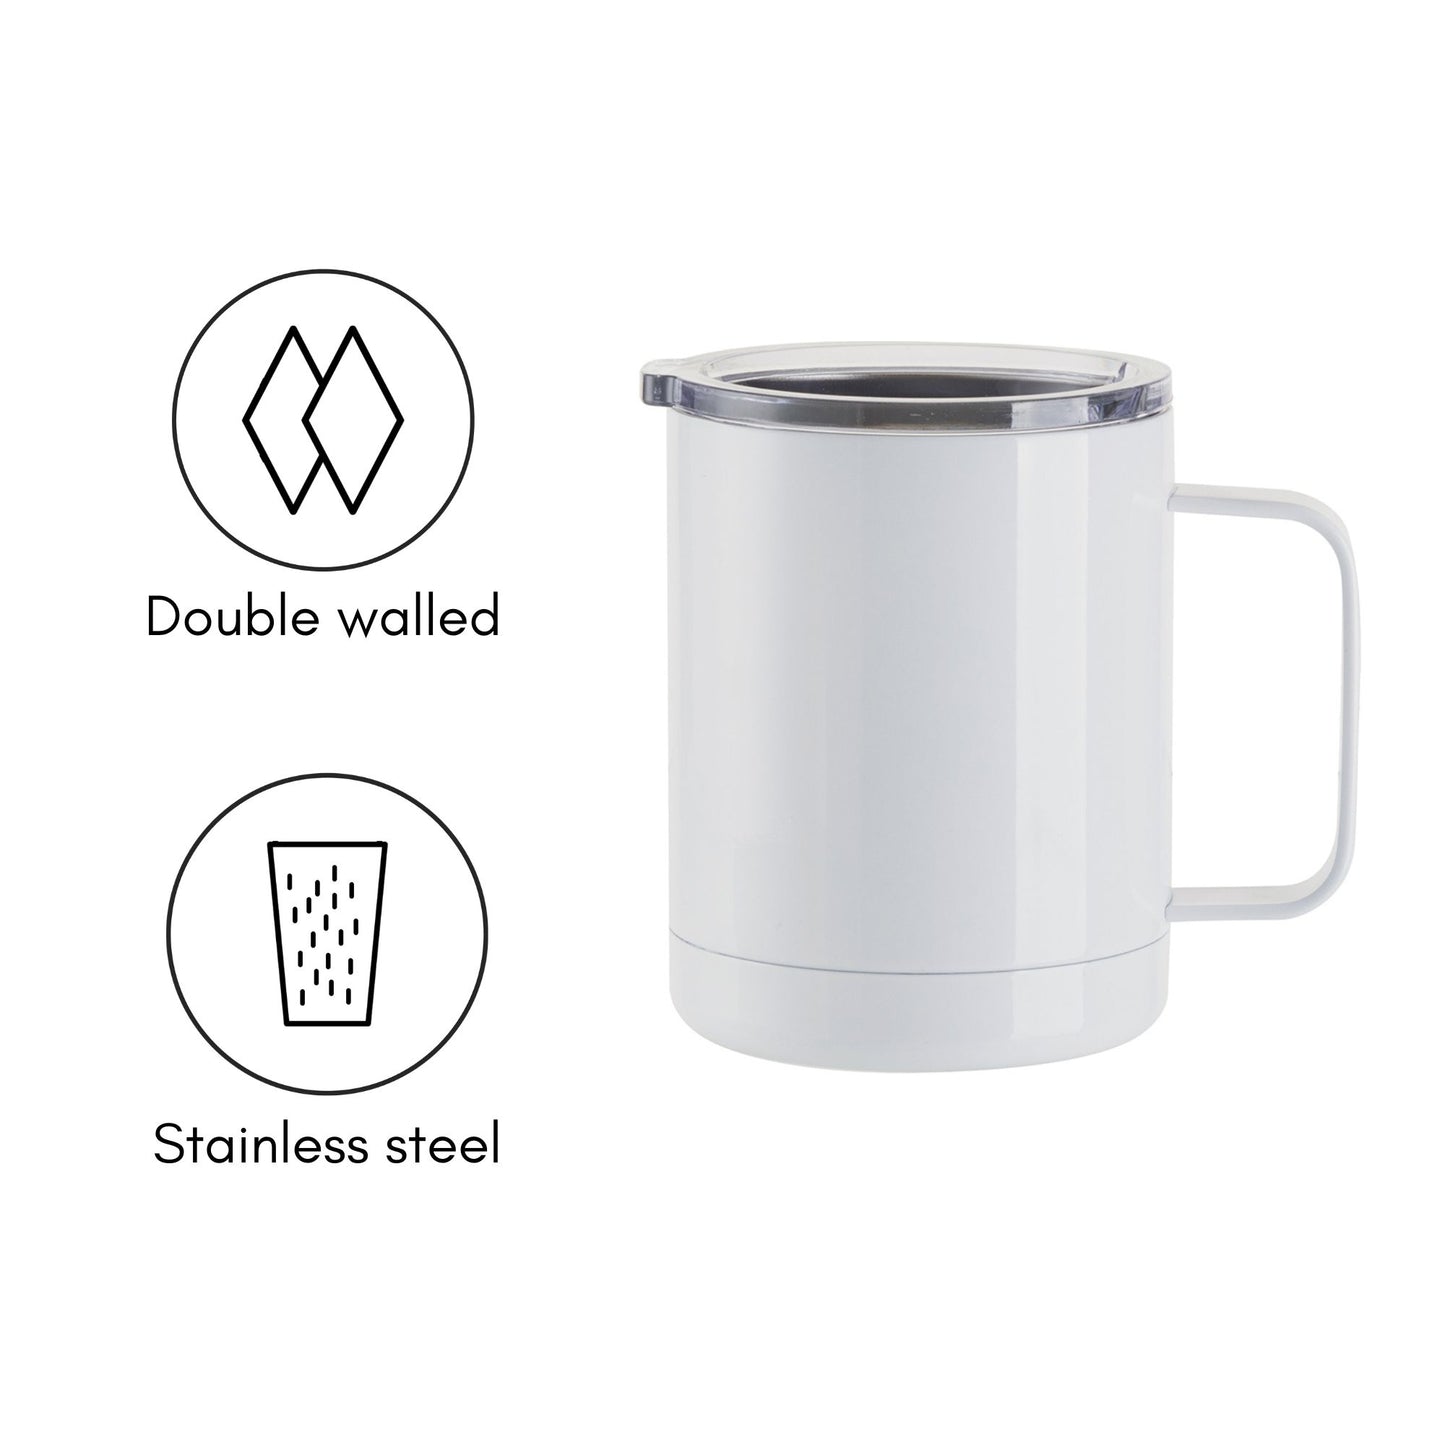 Craft Express 4 Pack 12 oz. Stainless Steel Sublimation Lidded Mugs